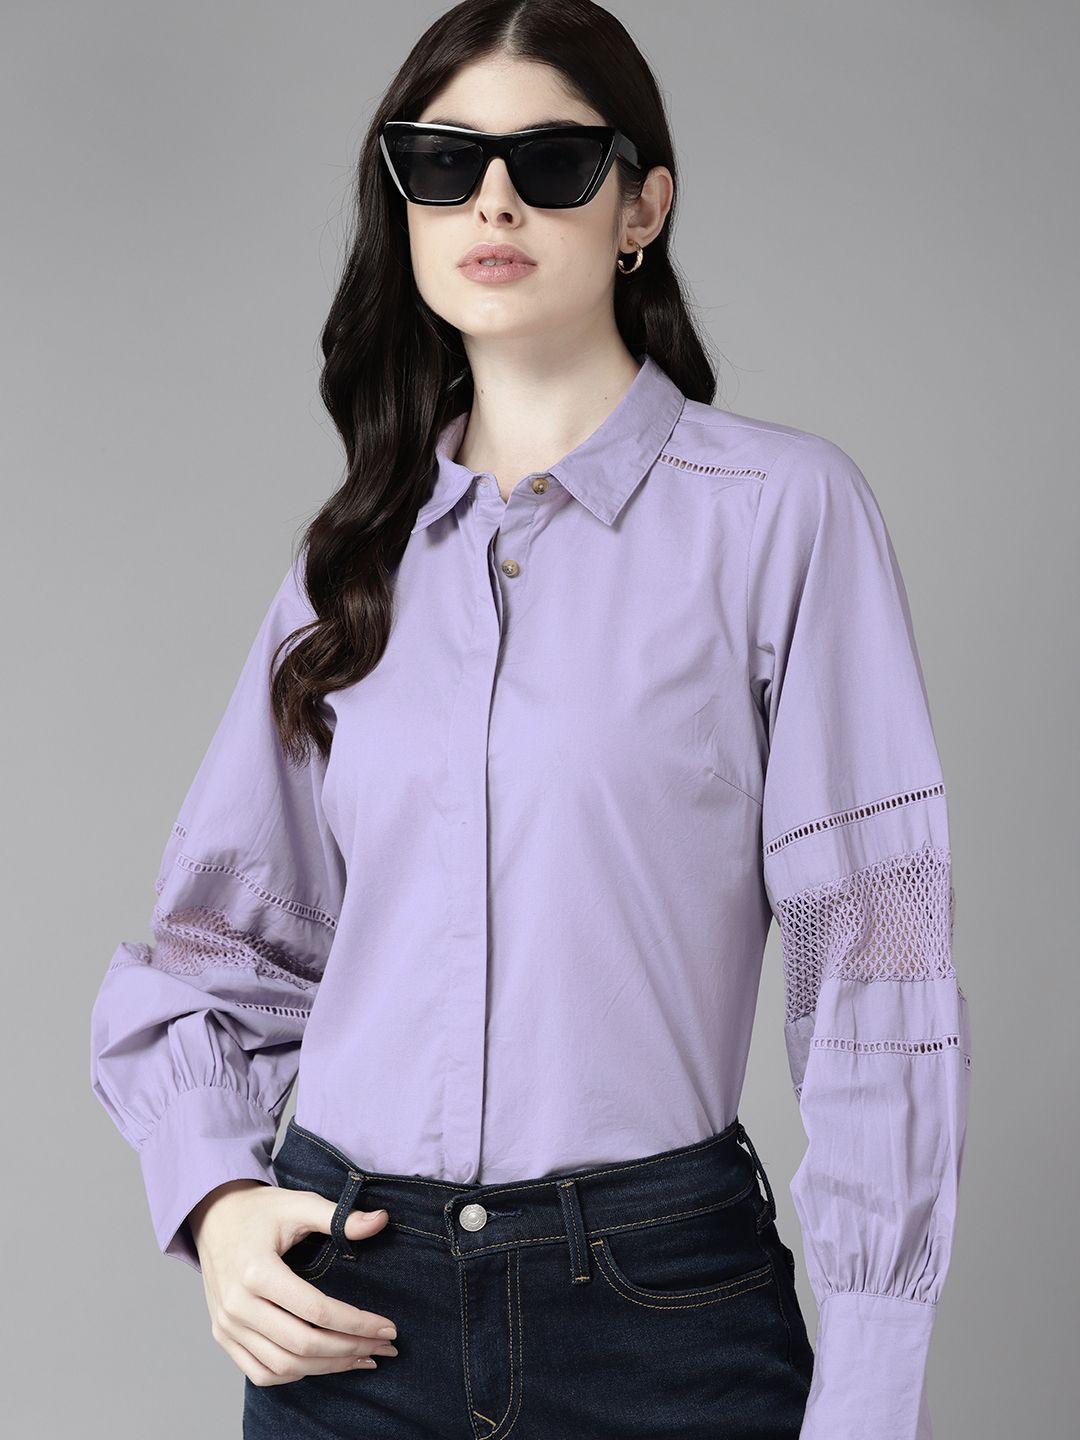 the roadster lifestyle co. pure cotton lace inserted casual shirt